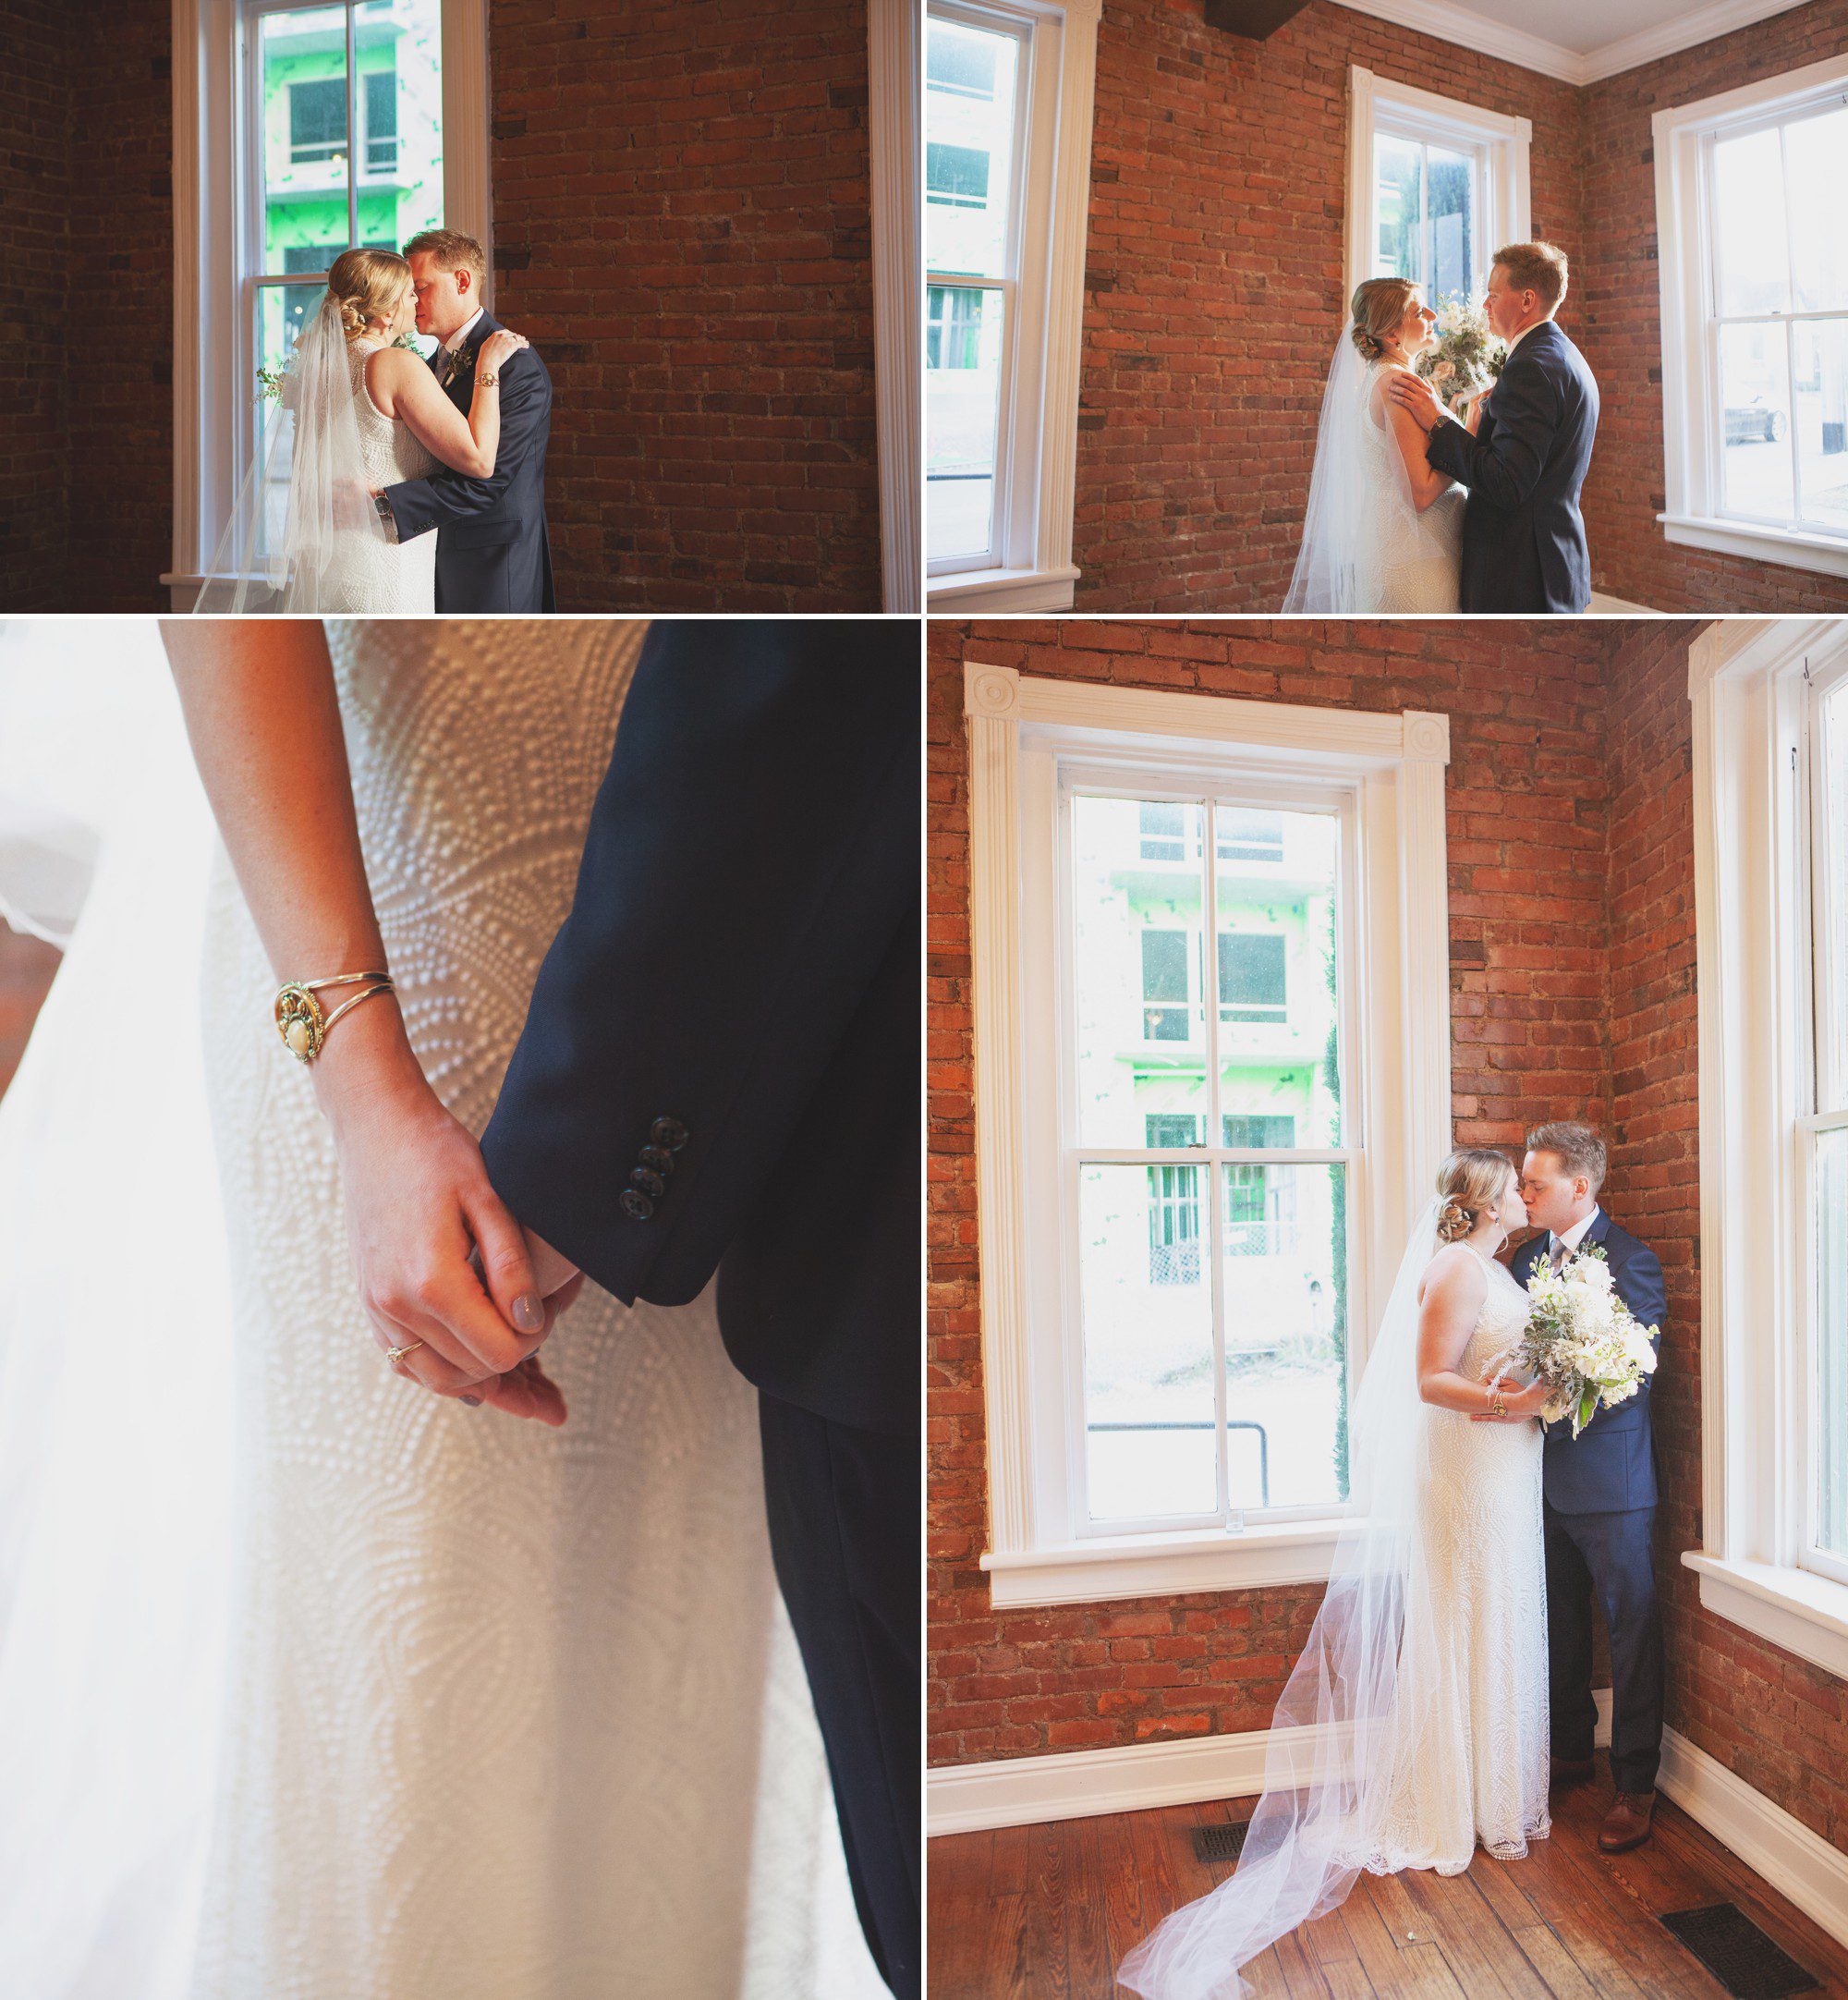 Bride and groom portraits at McConnell House in Franklin, TN before wedding ceremony. Photos by Krista Lee Photography Nashville, TN